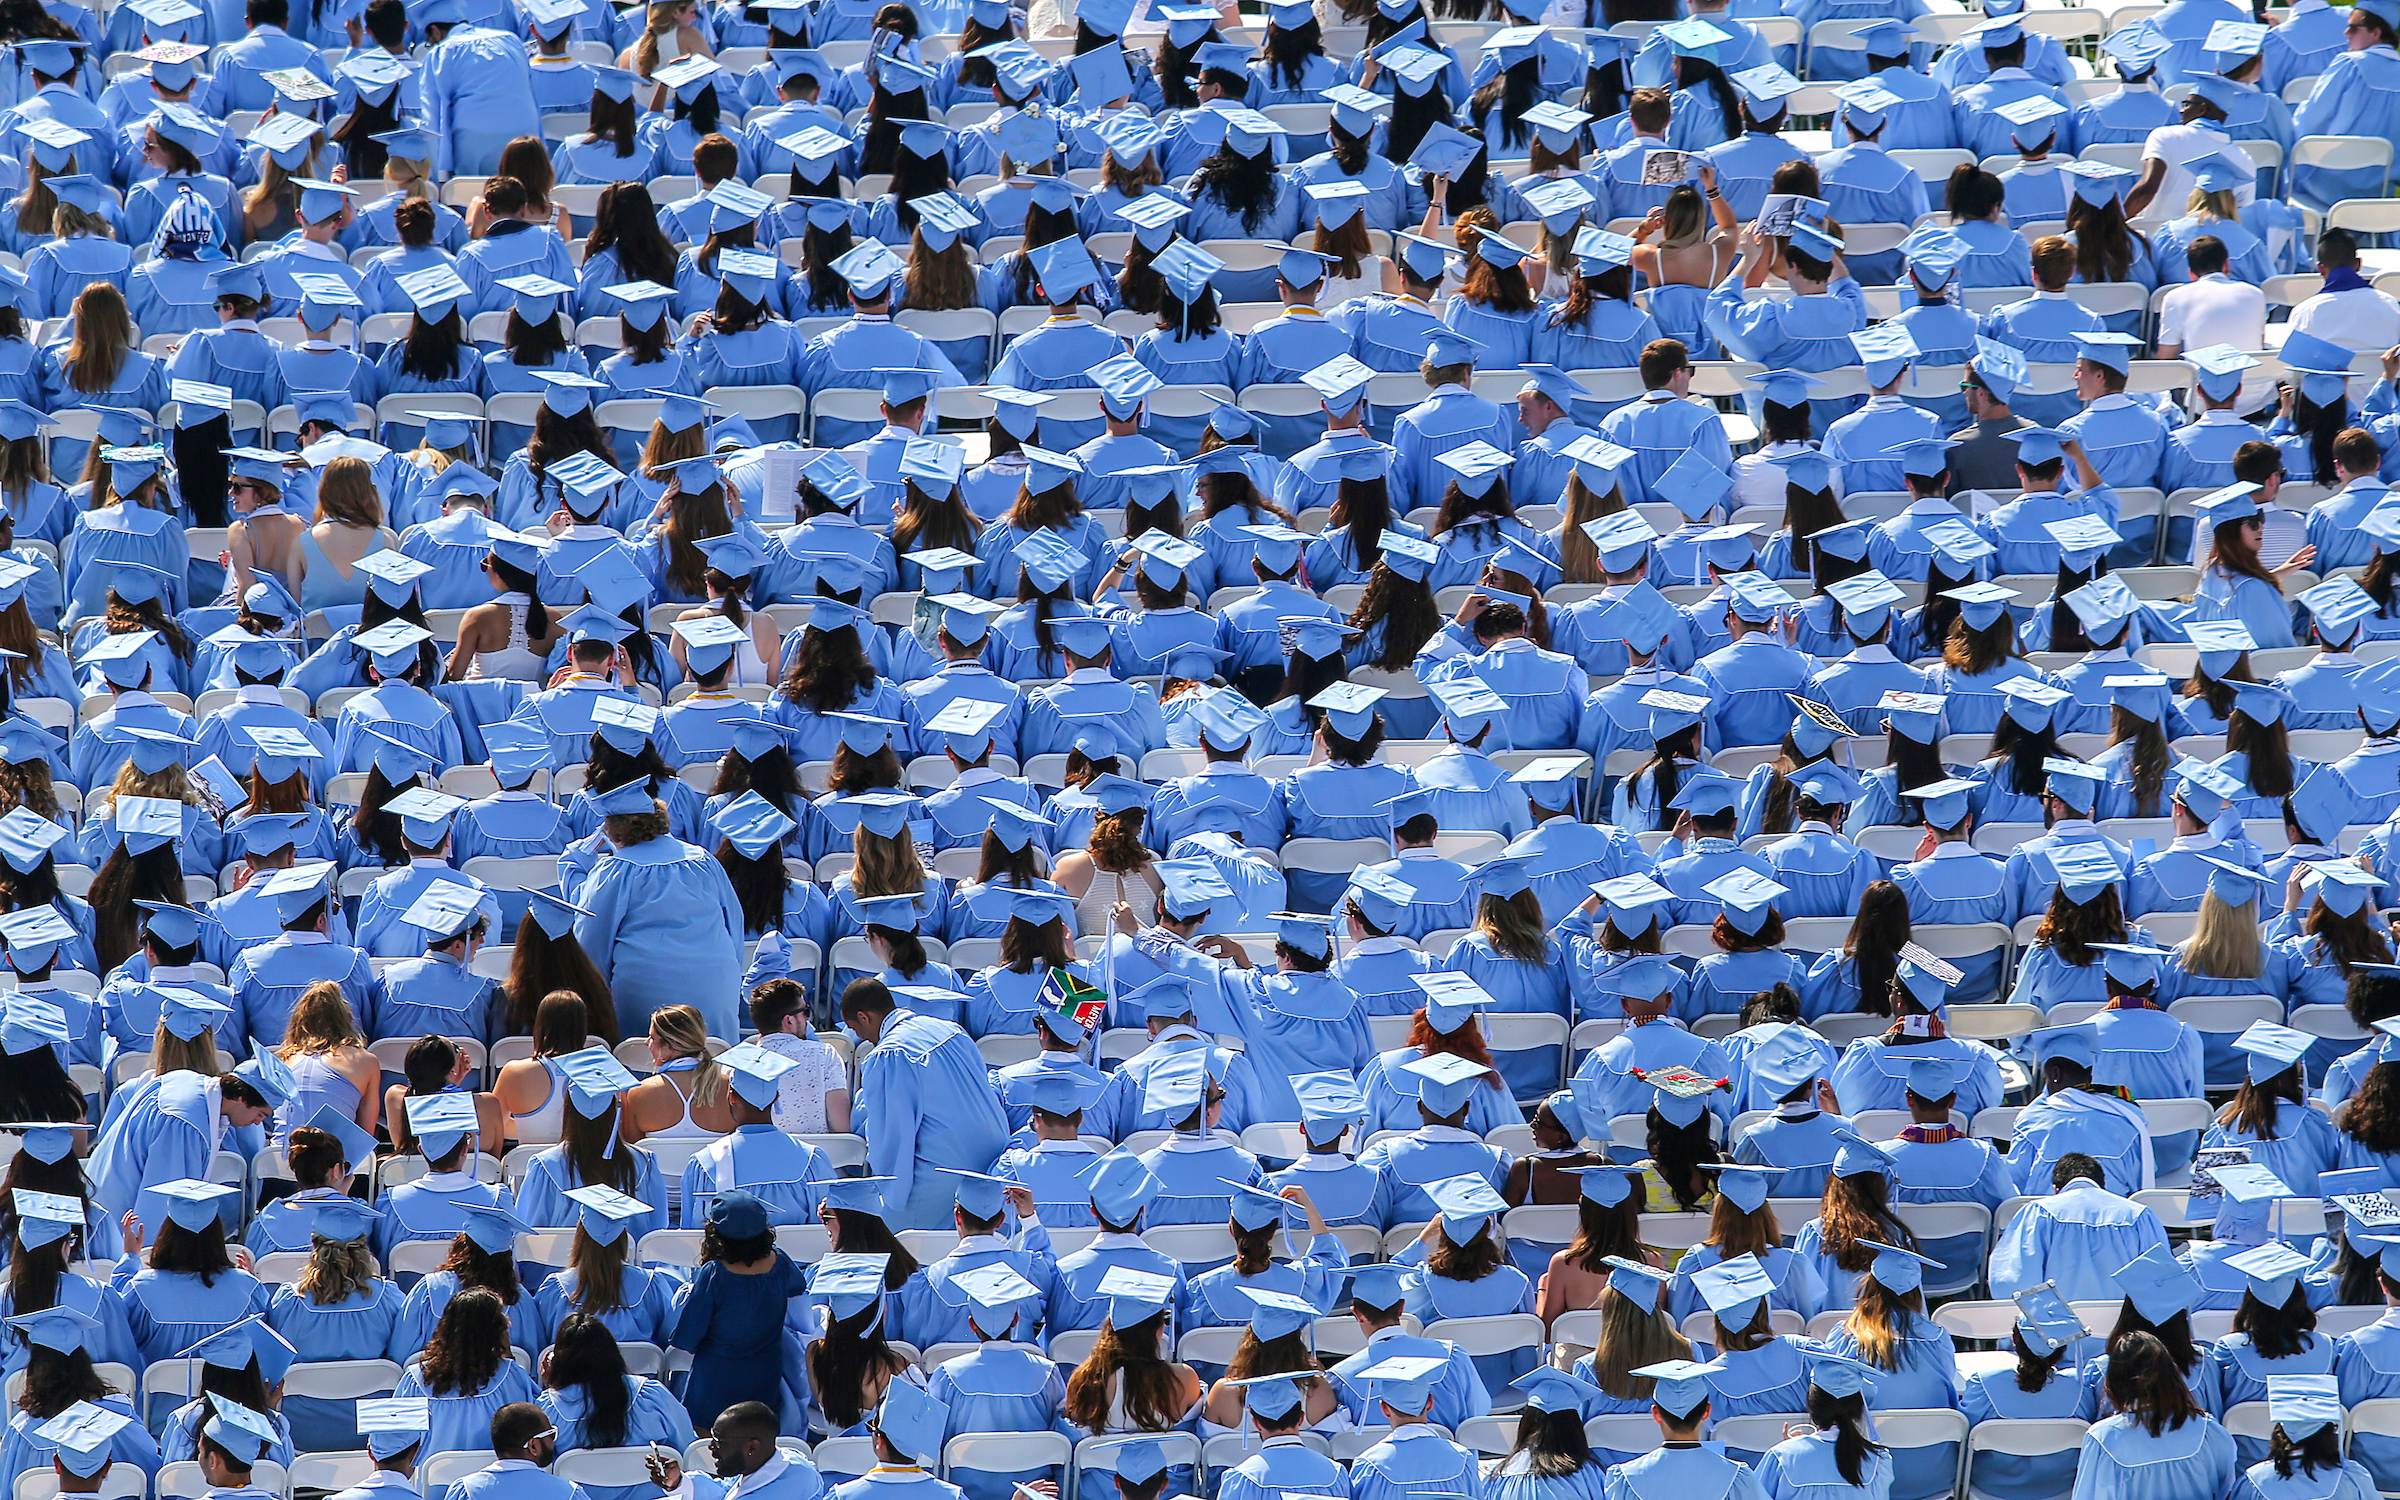 Photo shows a sea of Carolina blue graduation caps and gowns in the Kenan Stadium at the commencement 2018 ceremony.